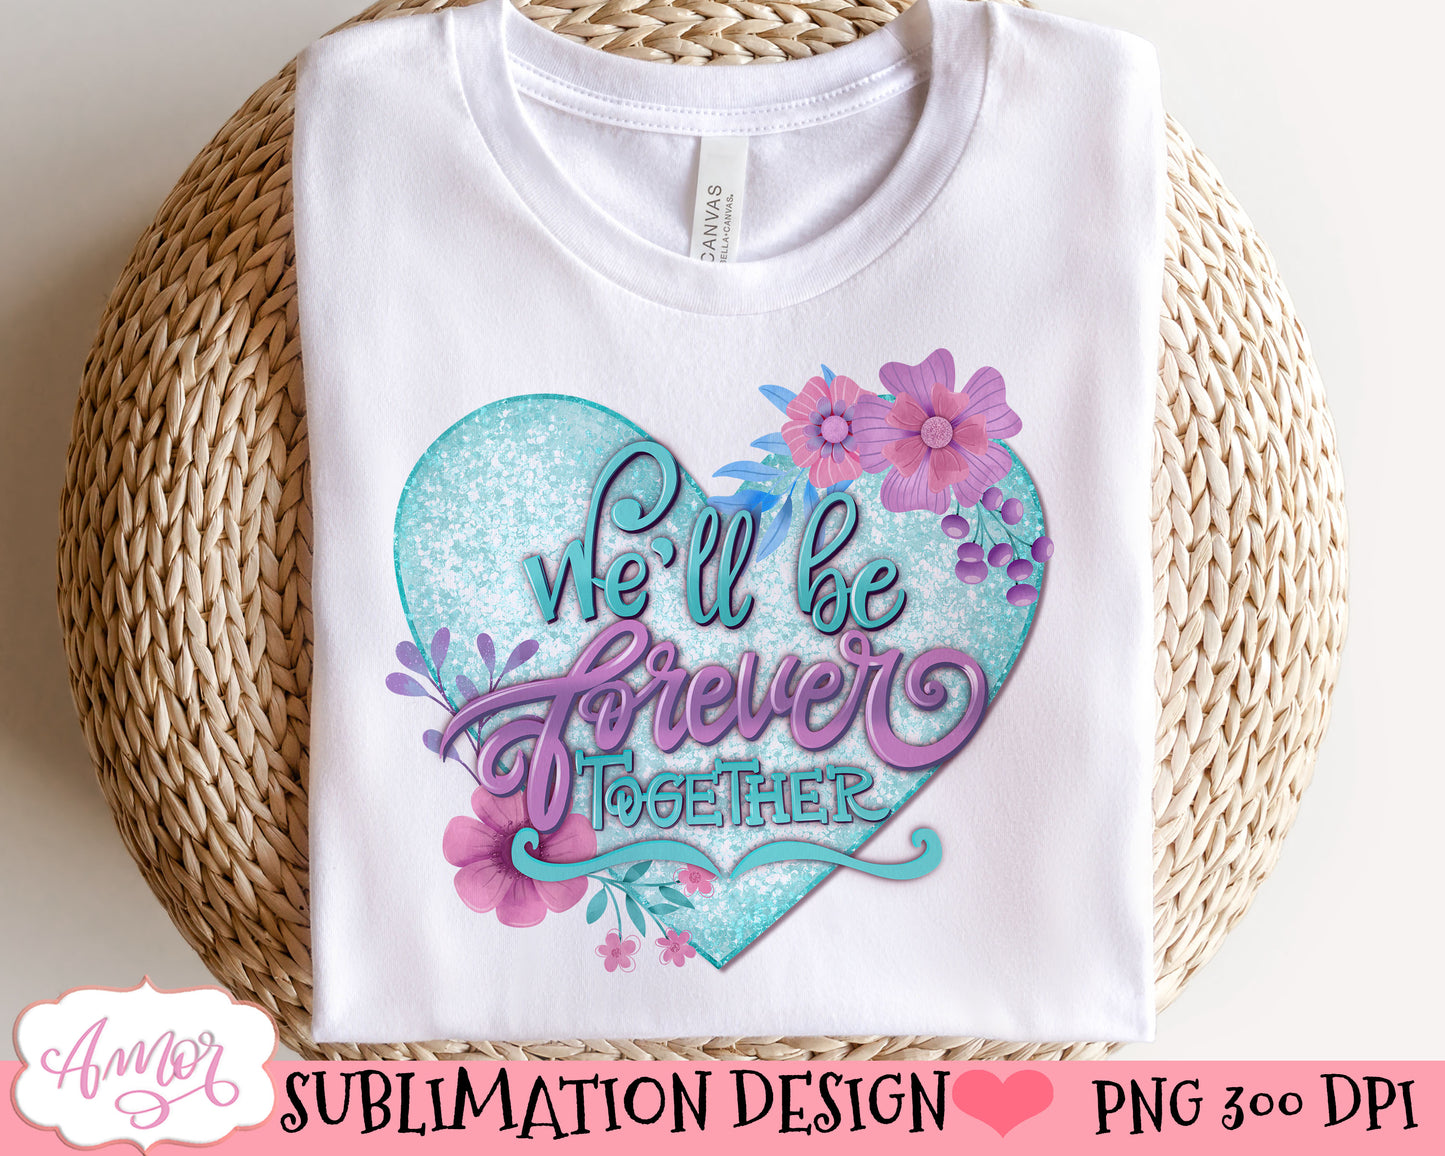 We will be forever together sublimation design for T-shirts